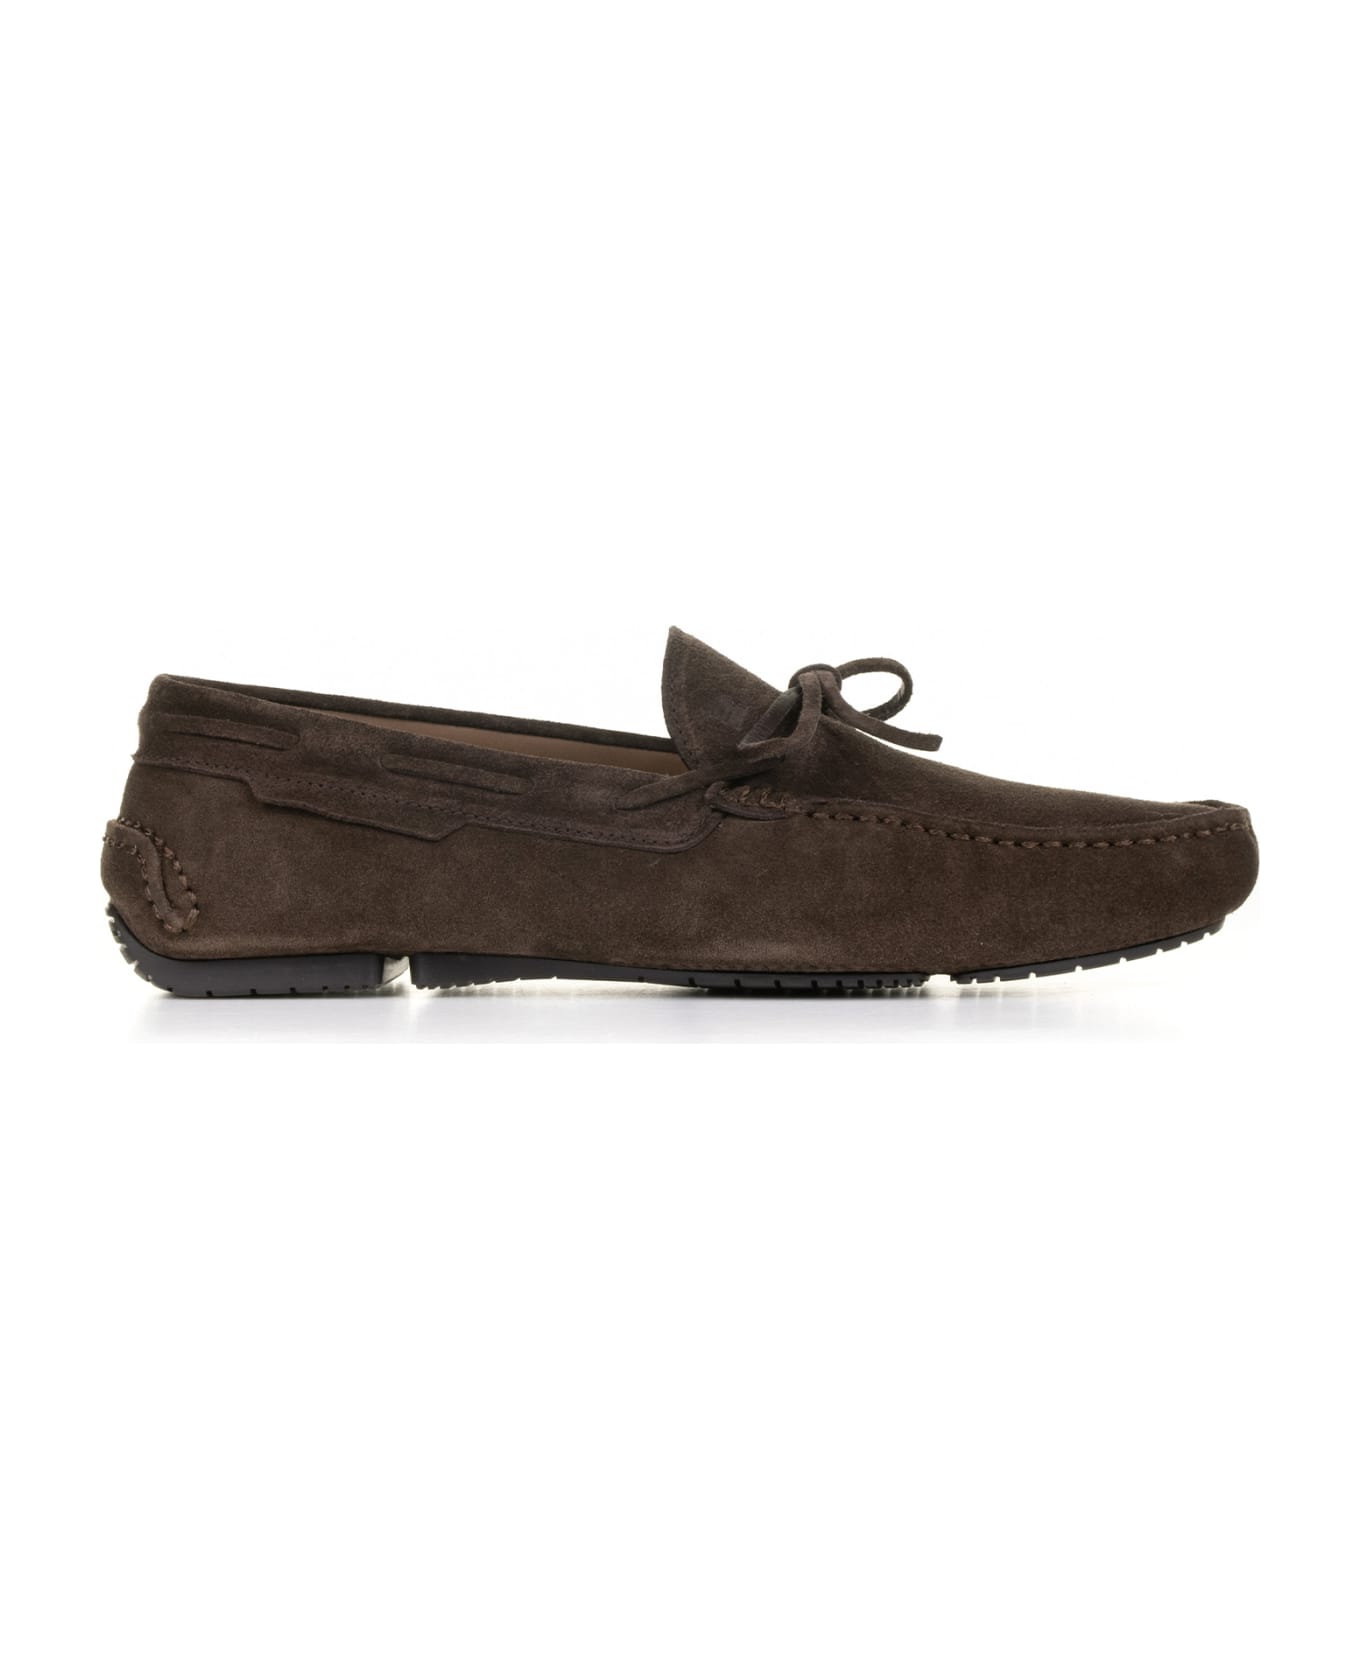 Fratelli Rossetti One Brown Suede Moccasin - T.MORO